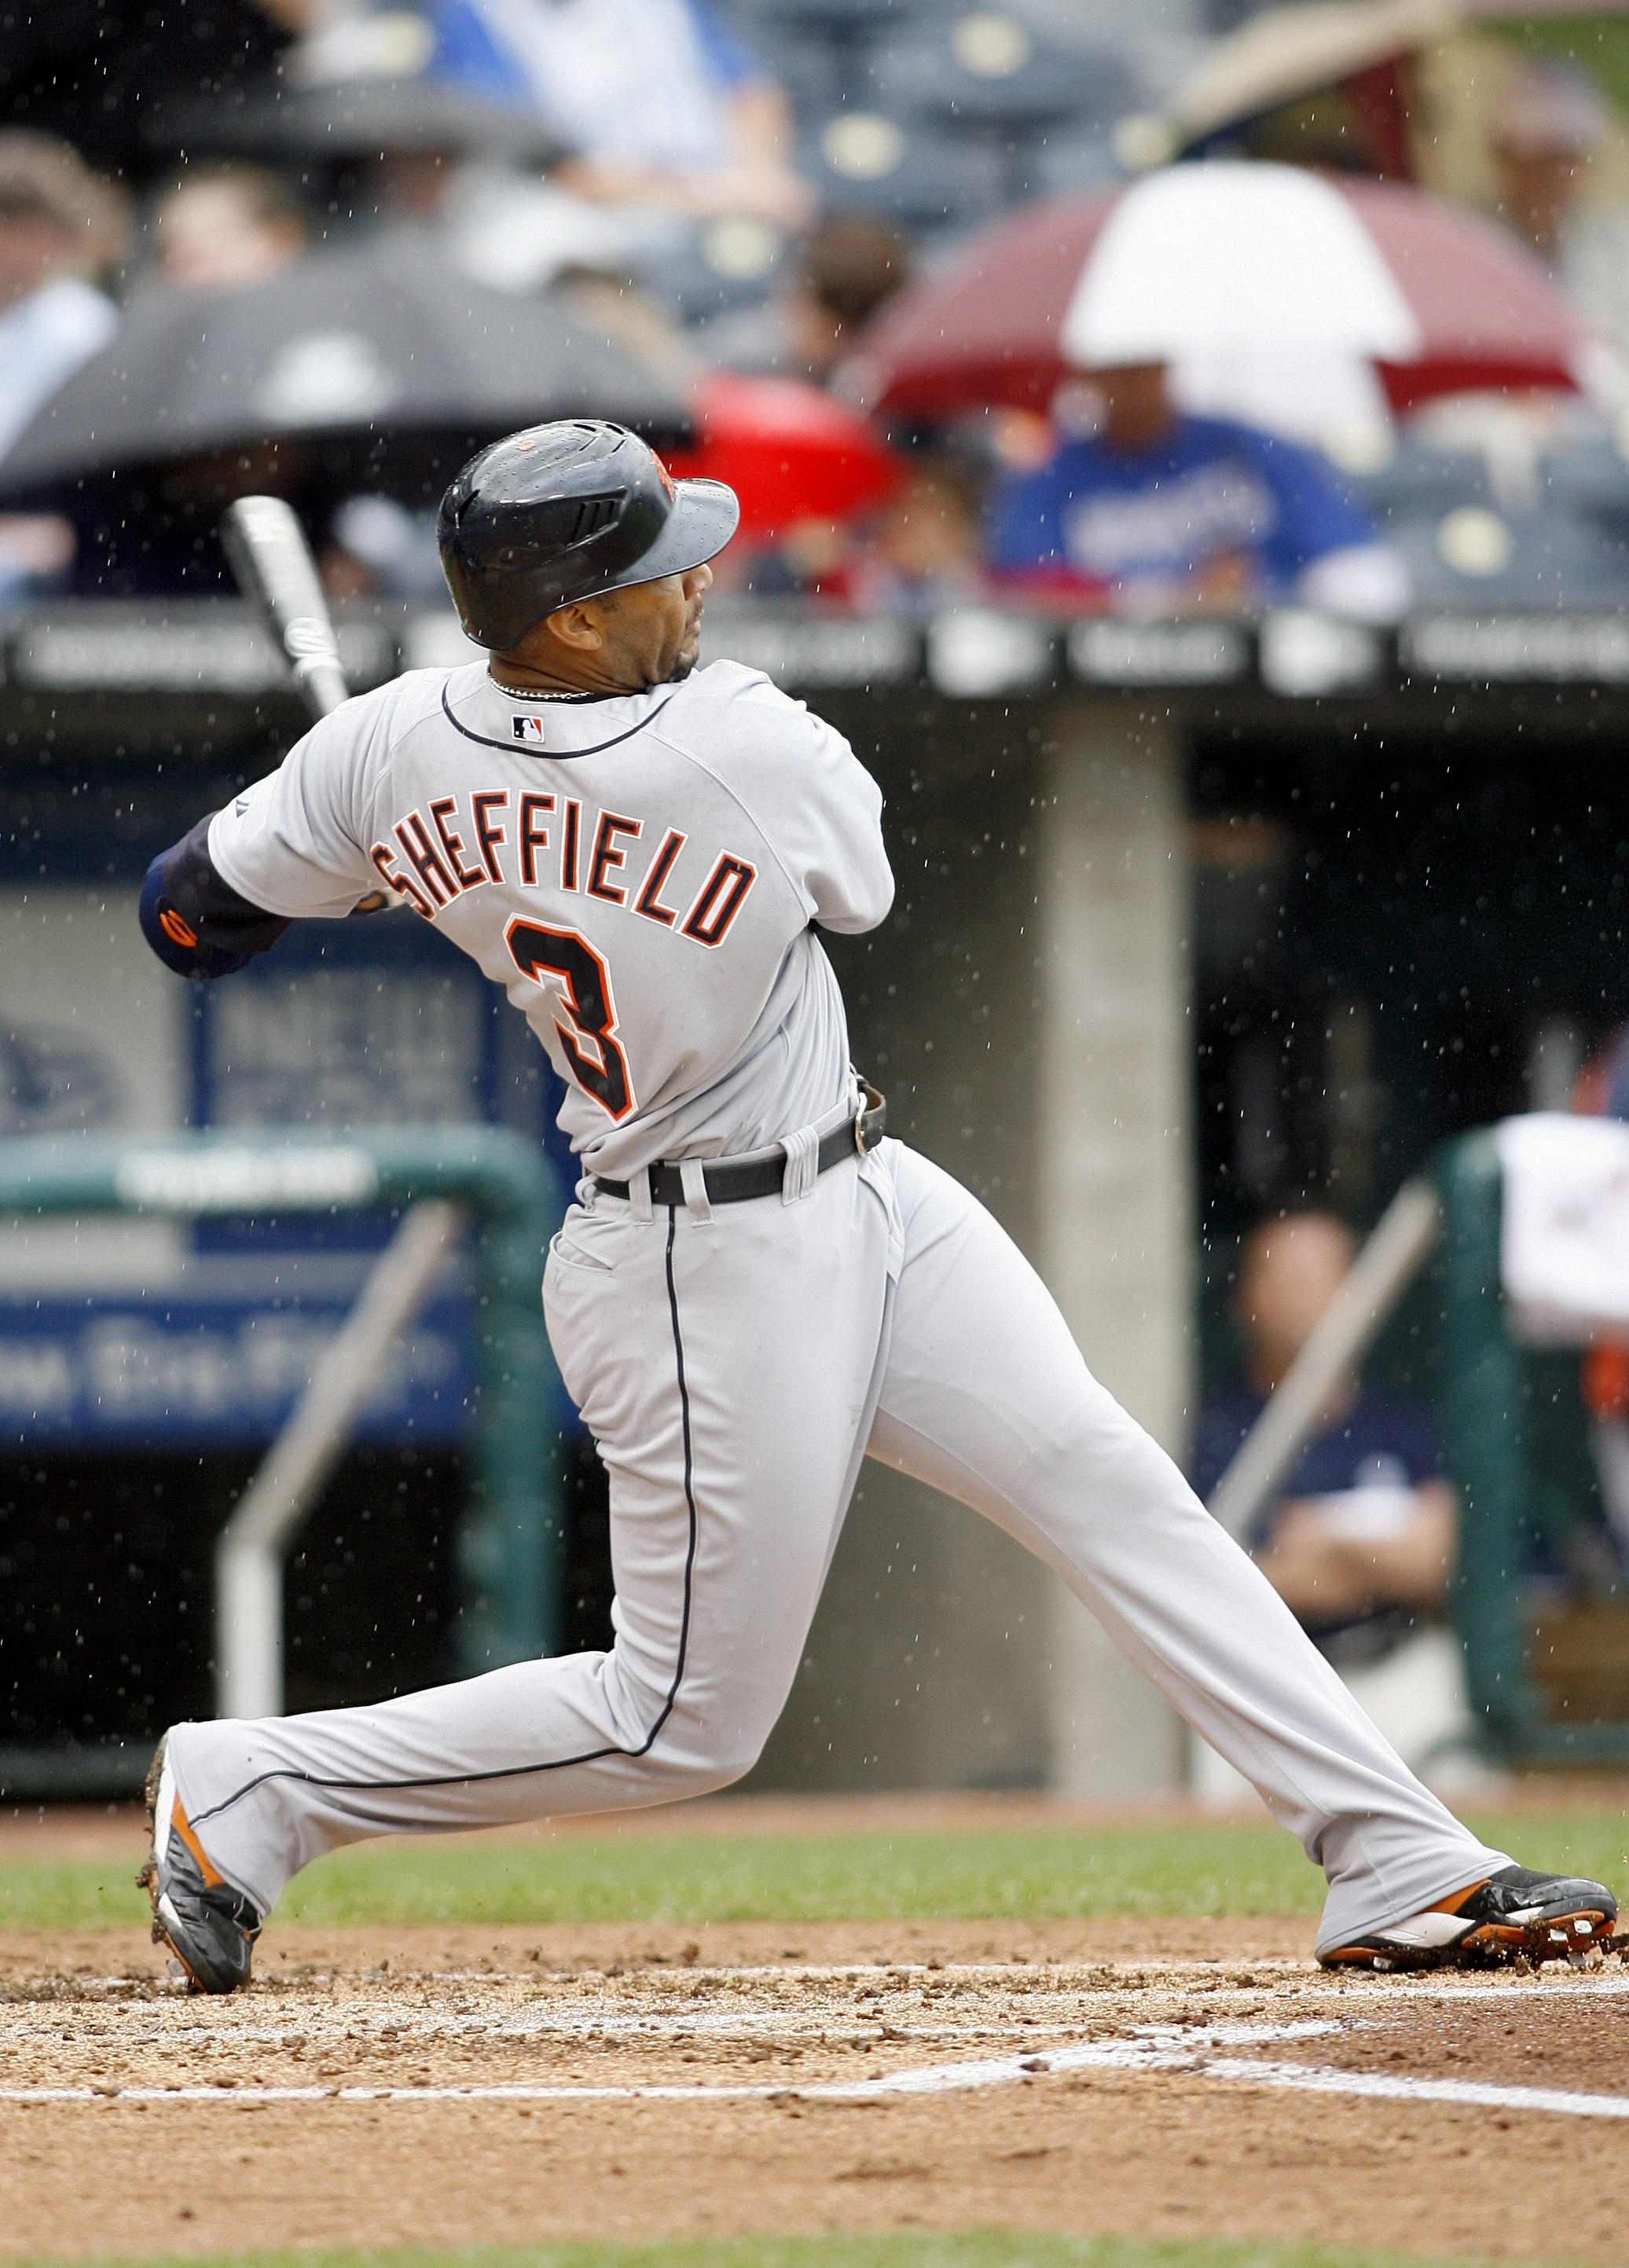 Gary Sheffield's link with steroids scandal keeps him from Hall of